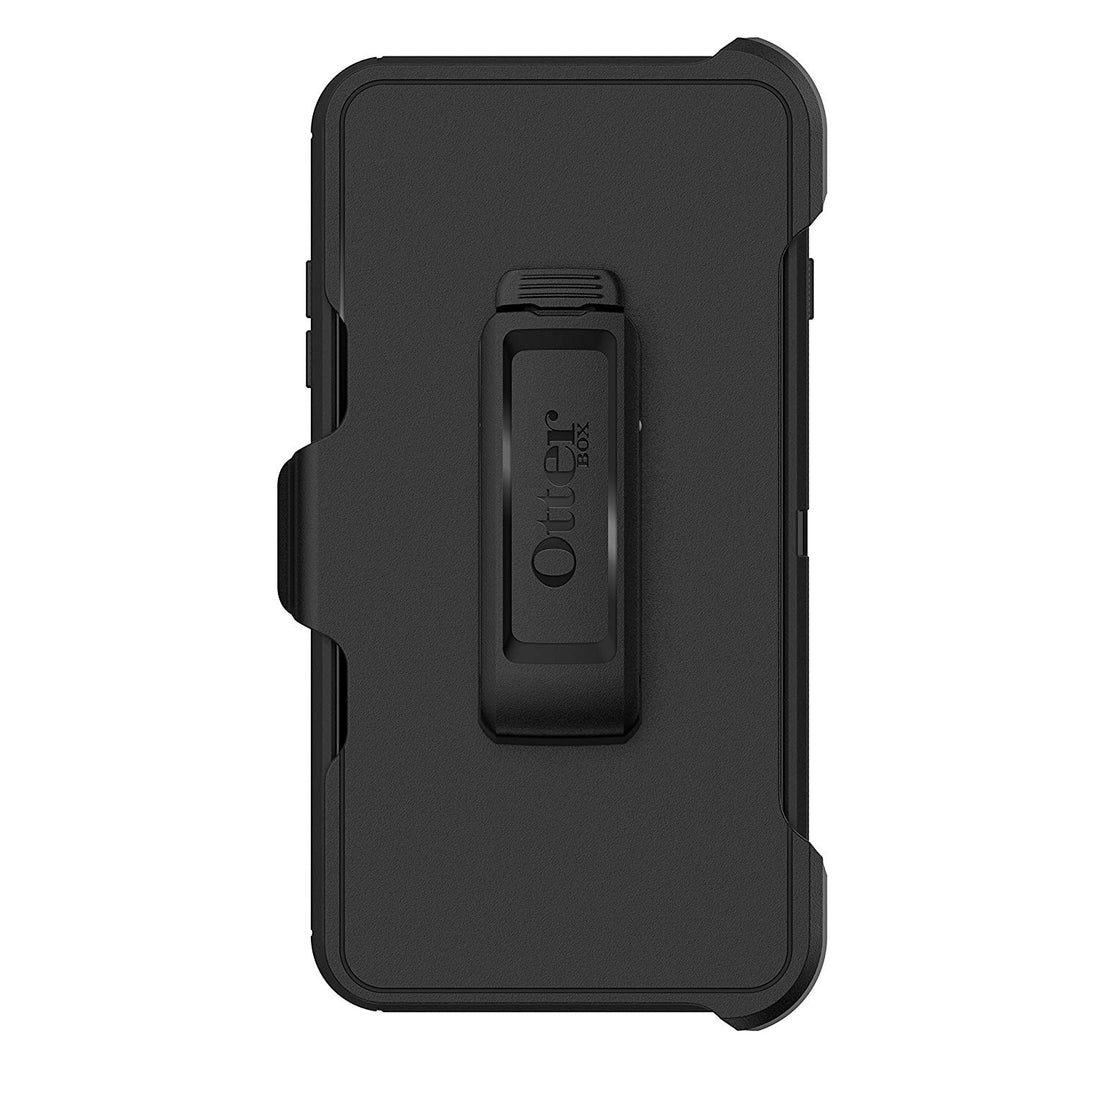 OtterBox DEFENDER SERIES Case &amp; Holster for iPhone 7 Plus/iPhone 8 Plus - Black (New)